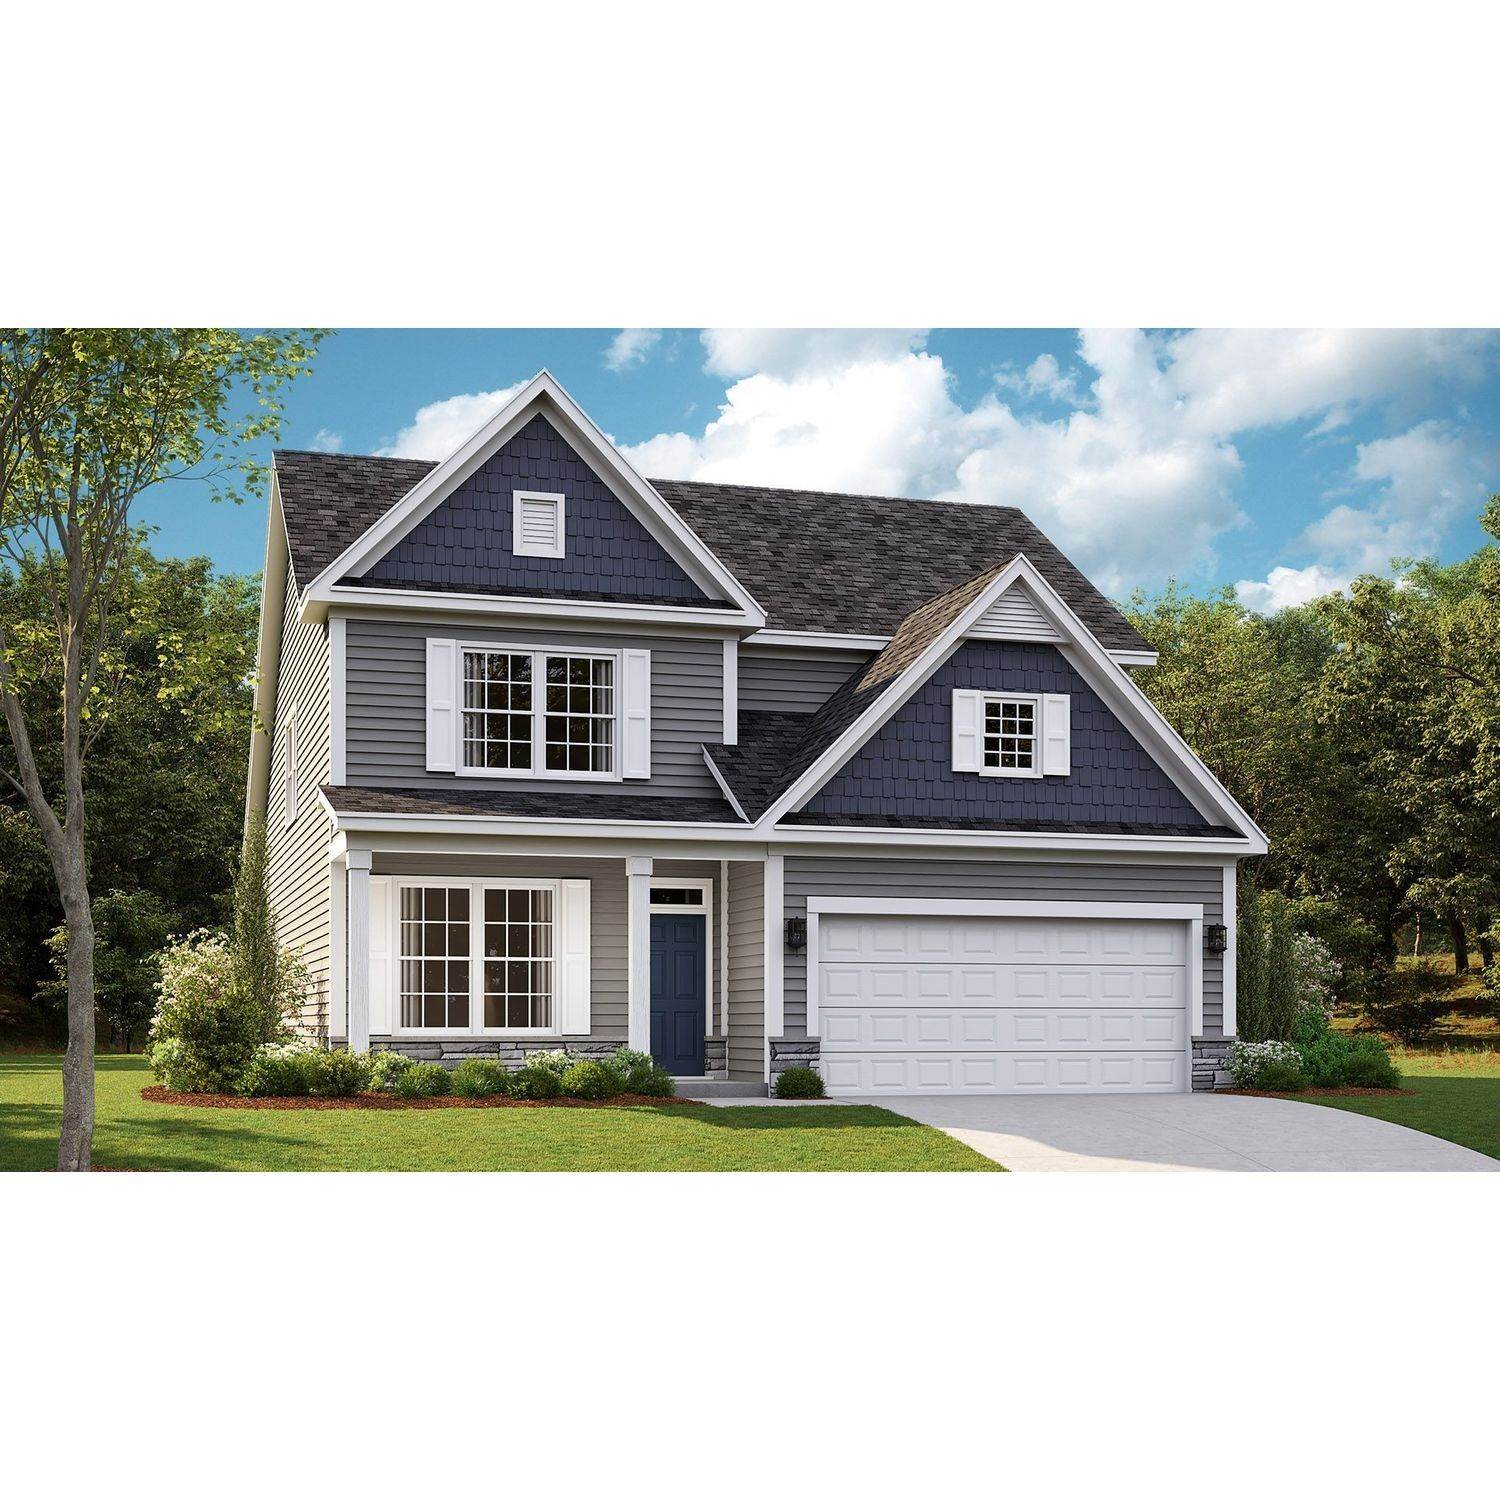 Single Family for Sale at Highcroft Pondhaven Drive, Fayetteville, NC 28314